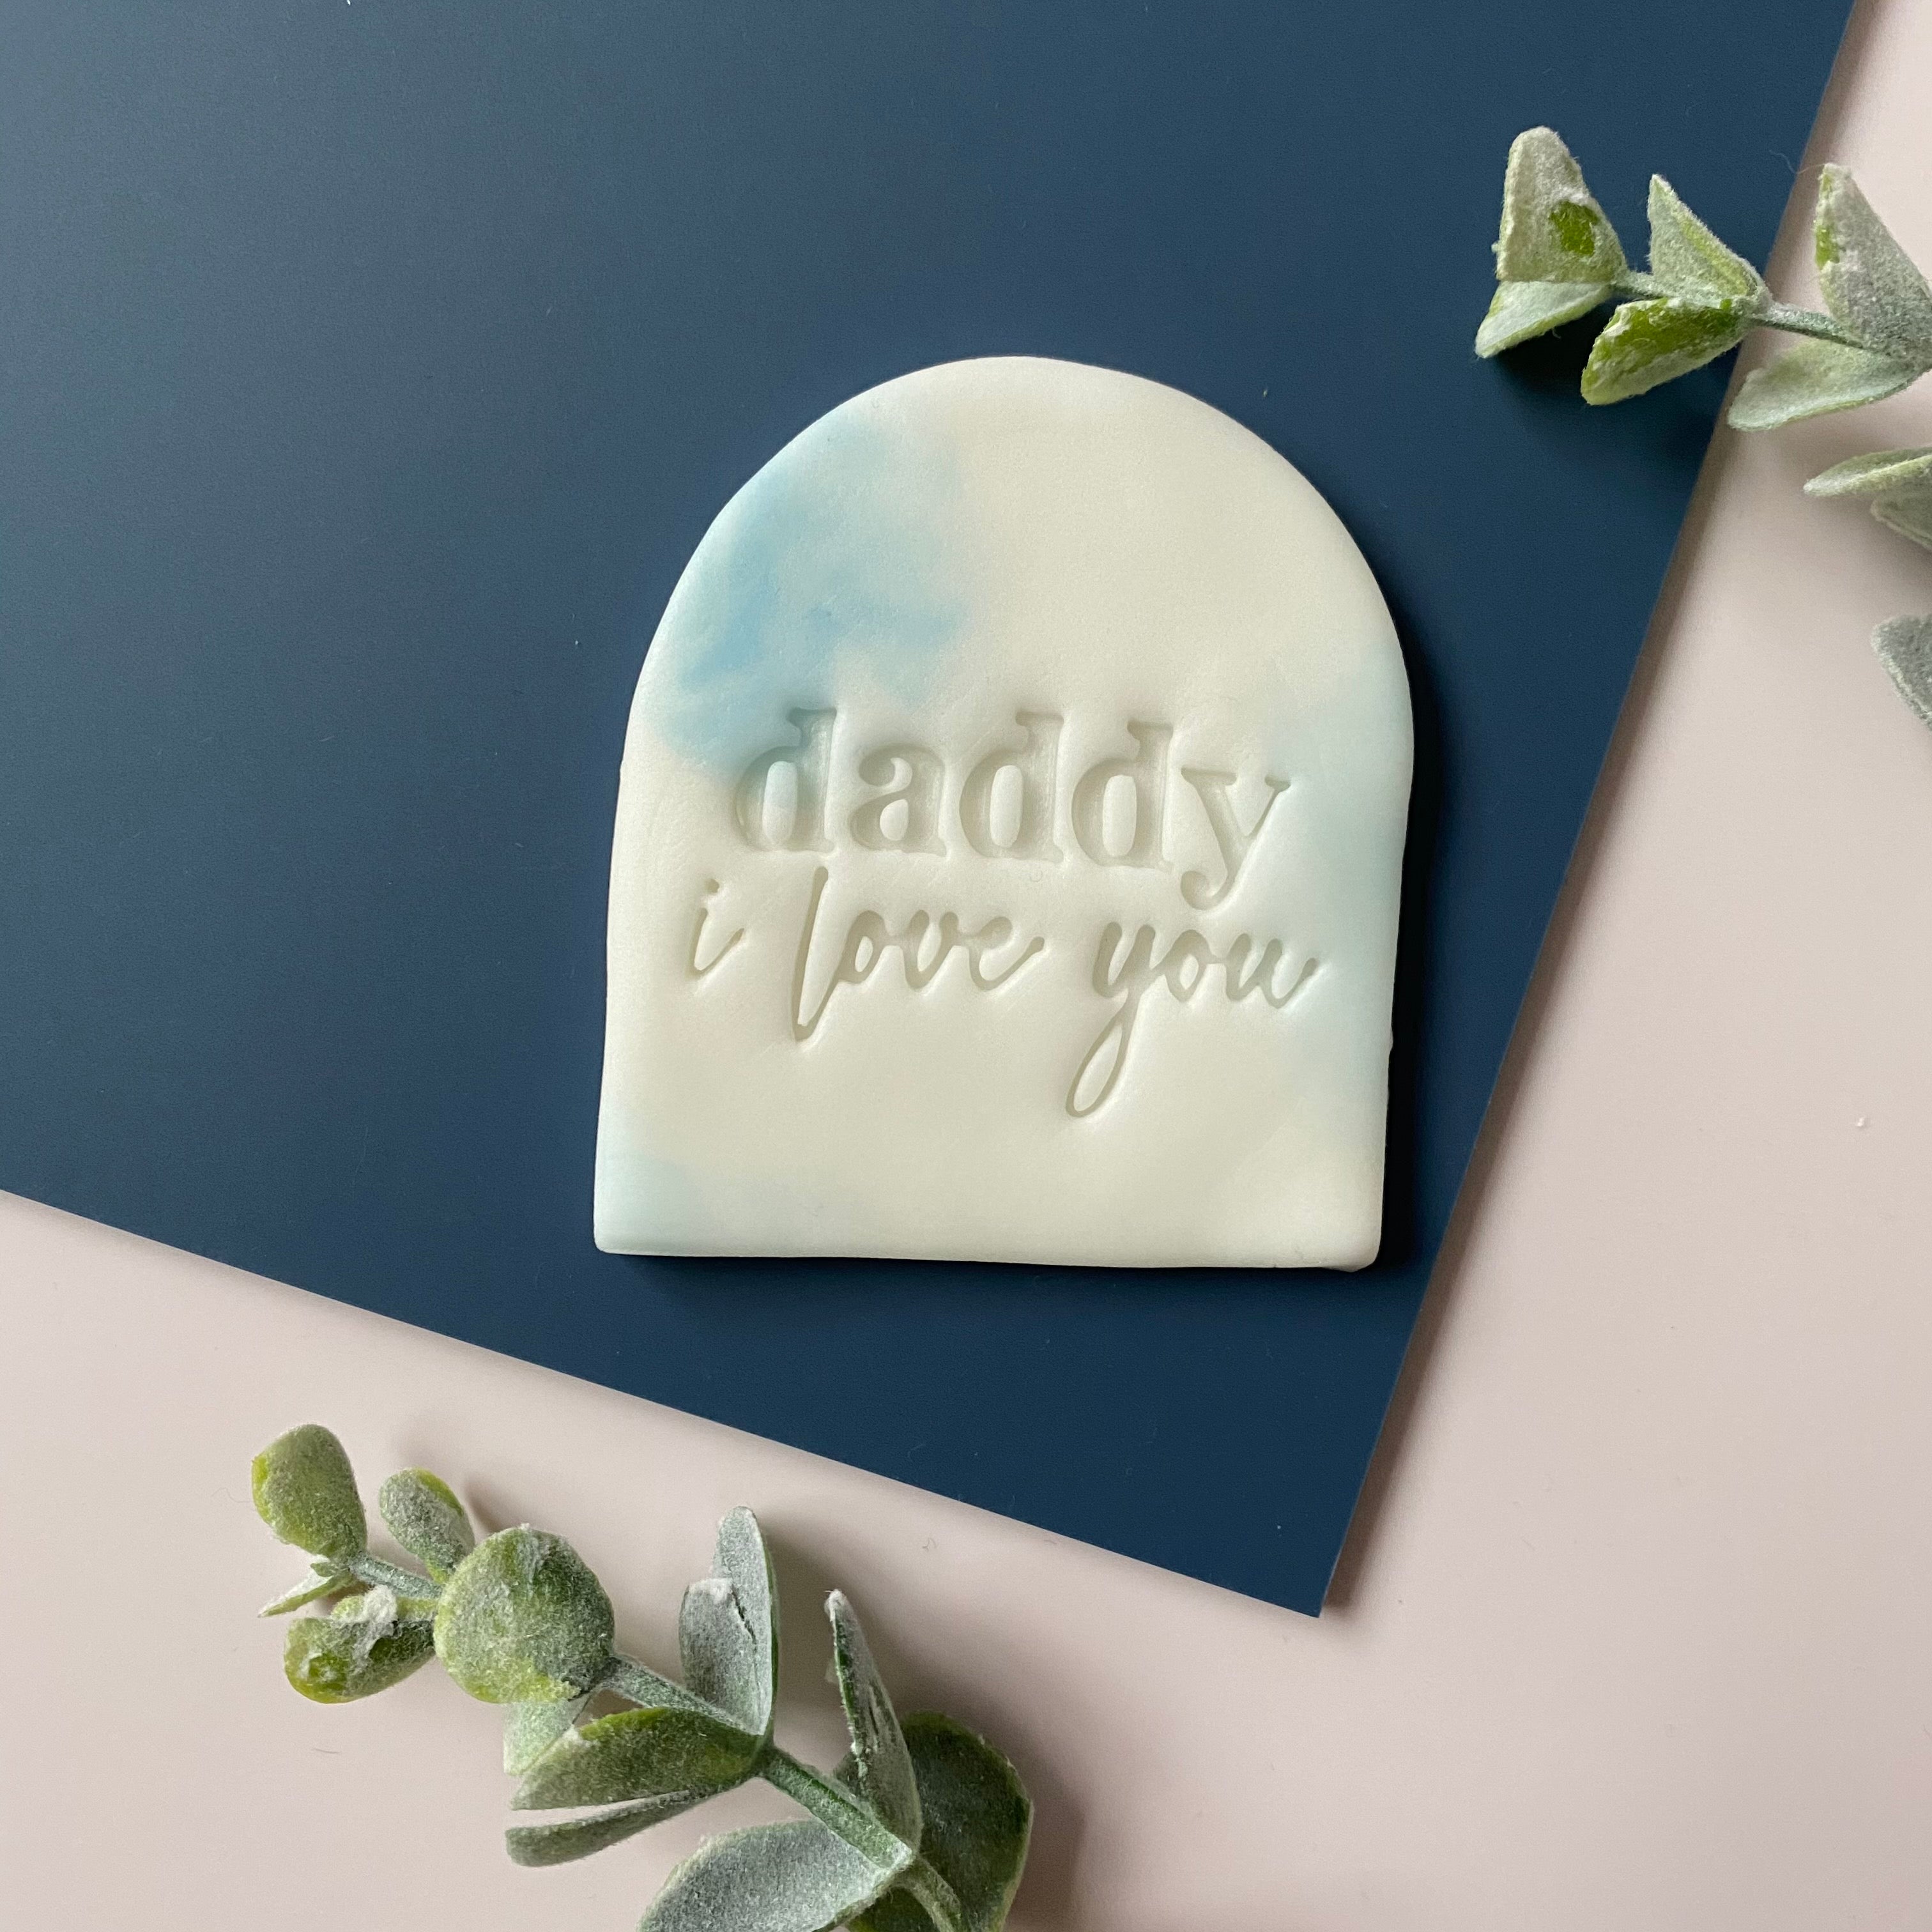 Daddy I Love You - Embosser Stamp